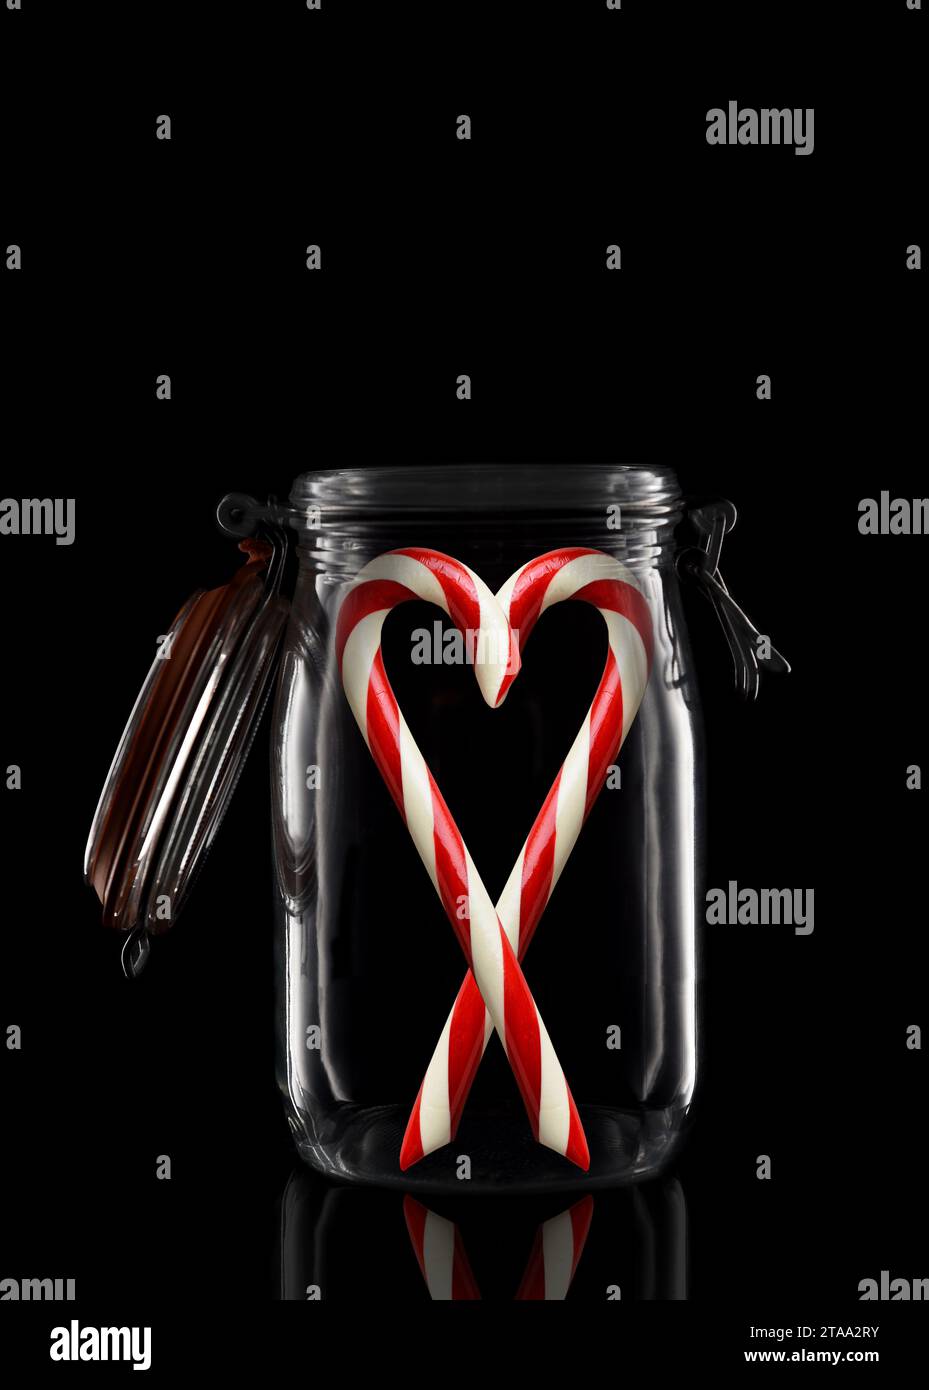 https://c8.alamy.com/comp/2TAA2RY/two-candy-canes-in-a-glass-storage-or-canning-jar-isolated-on-black-with-reflection-with-lid-open-2TAA2RY.jpg